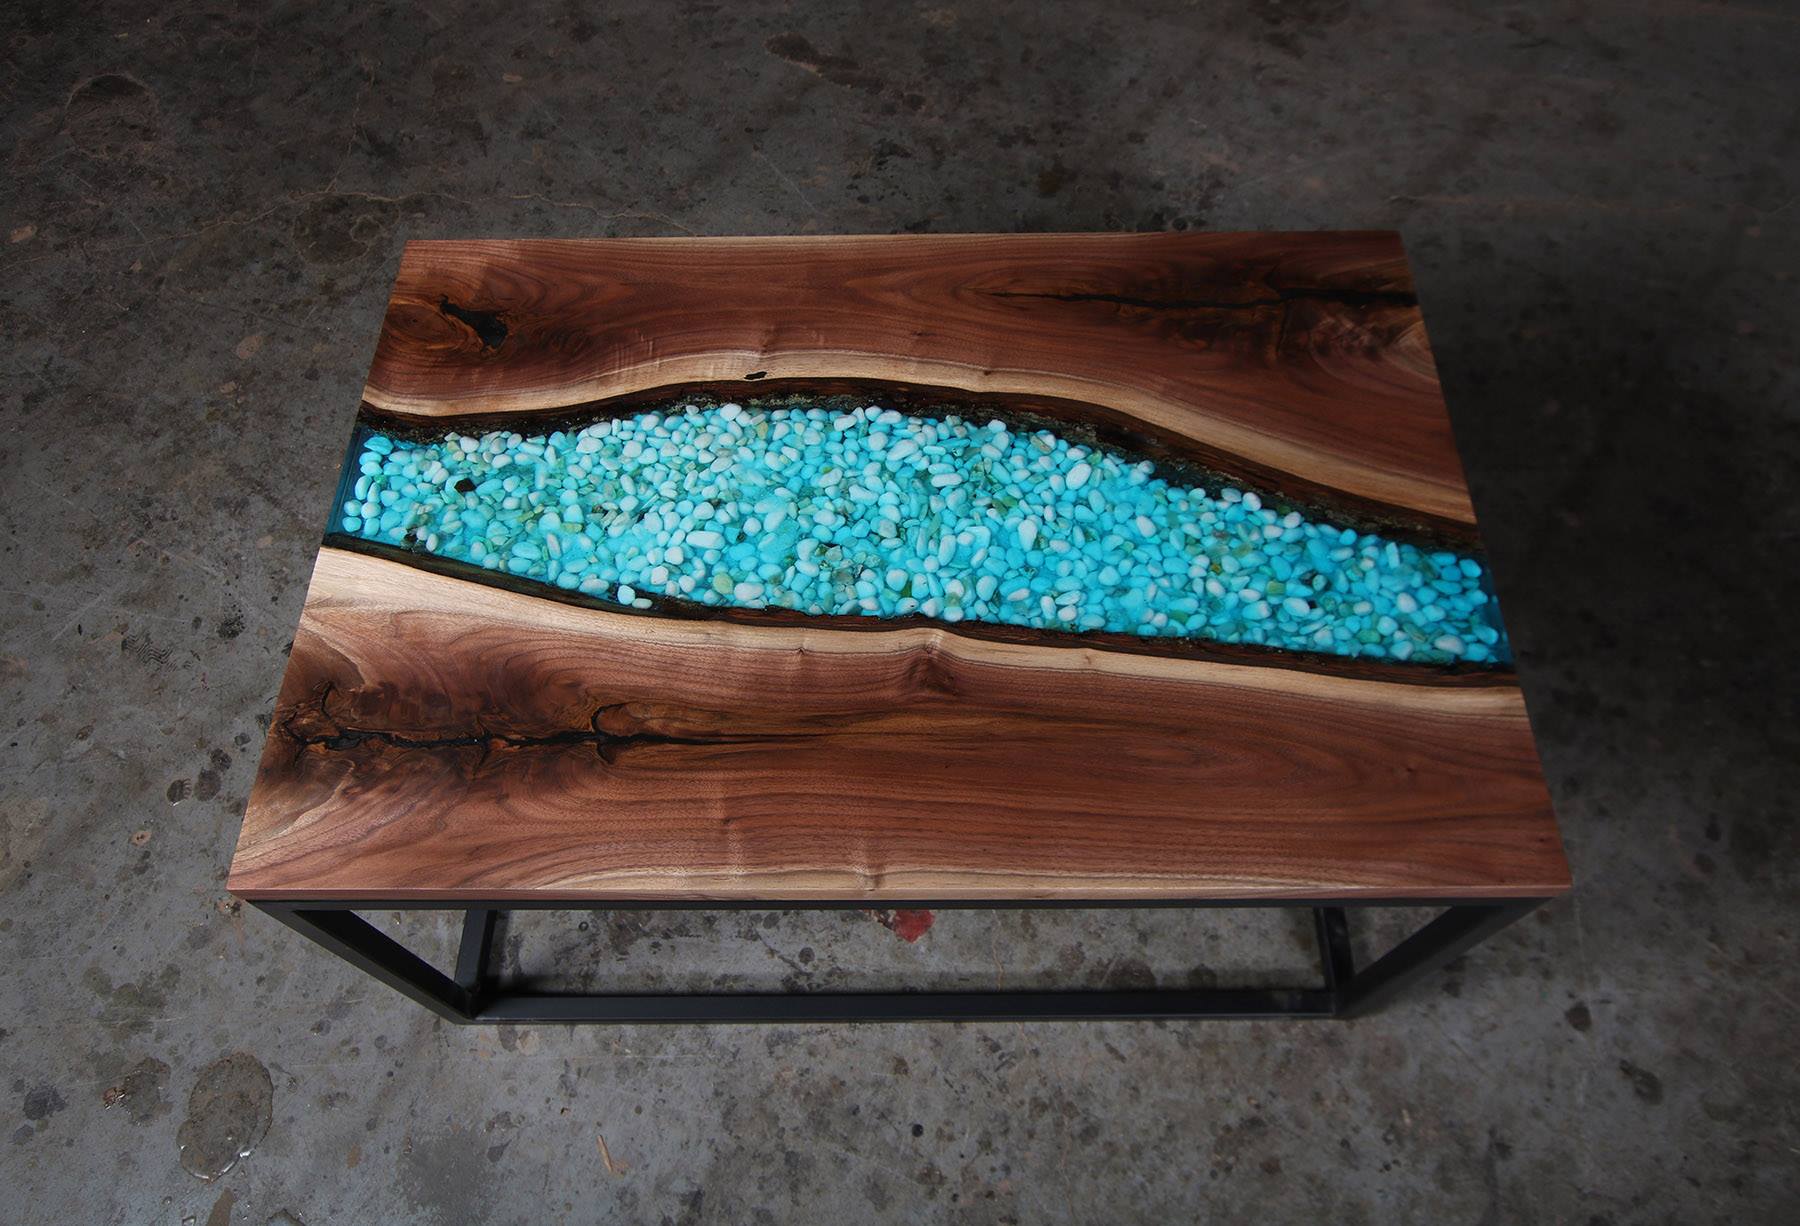 Wood Epoxy River Coffee Table - River epoxy table round small coffee